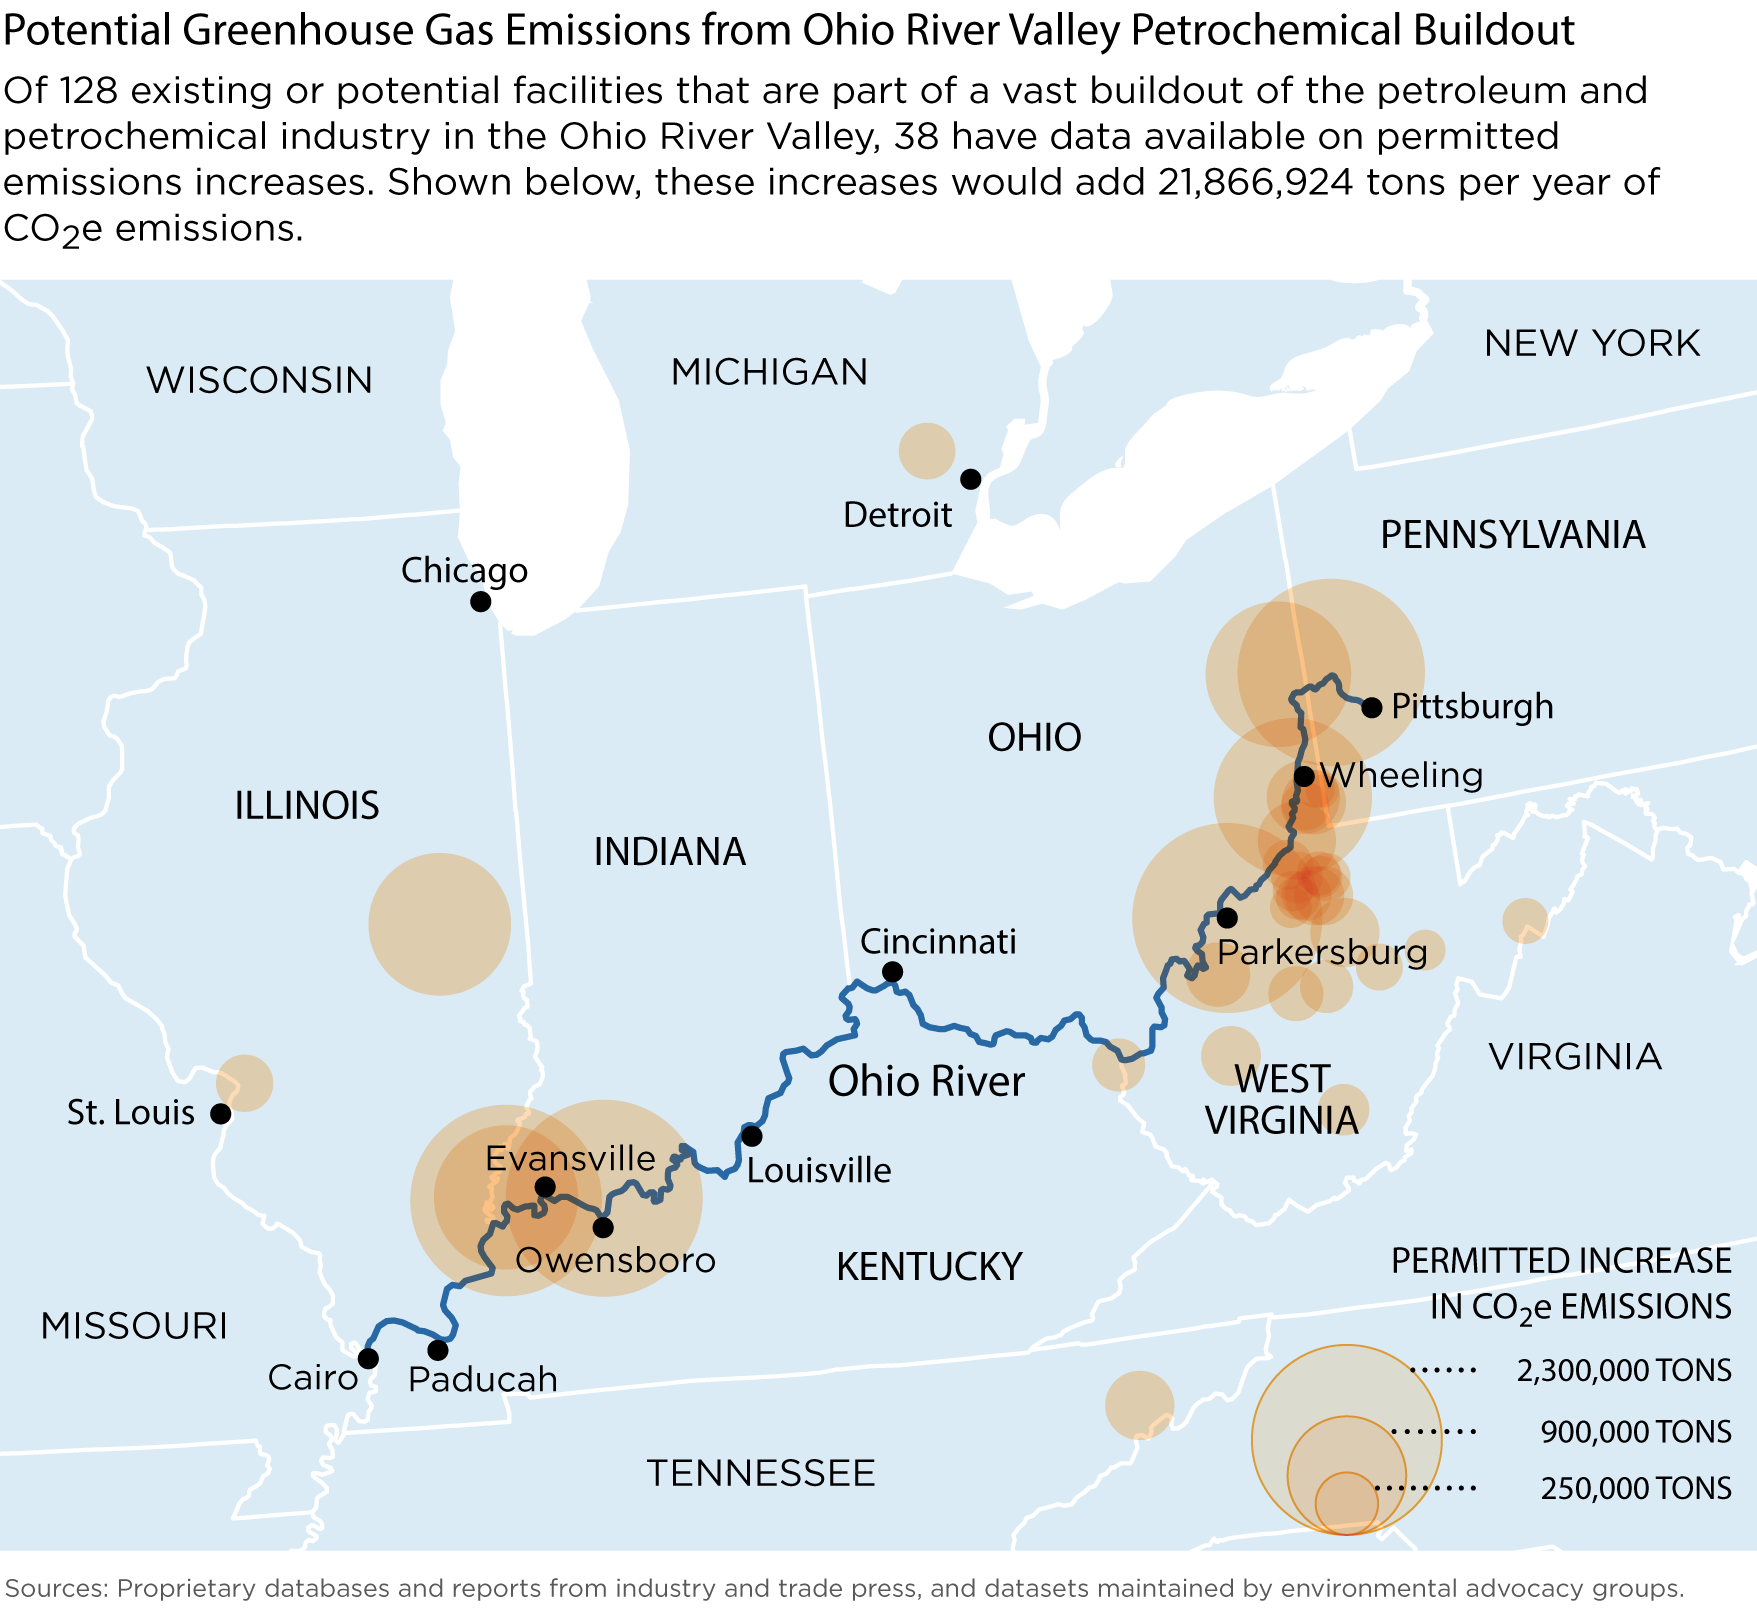 Potential greenhouse gas emissions from Ohio River Valley petrochemical buildout